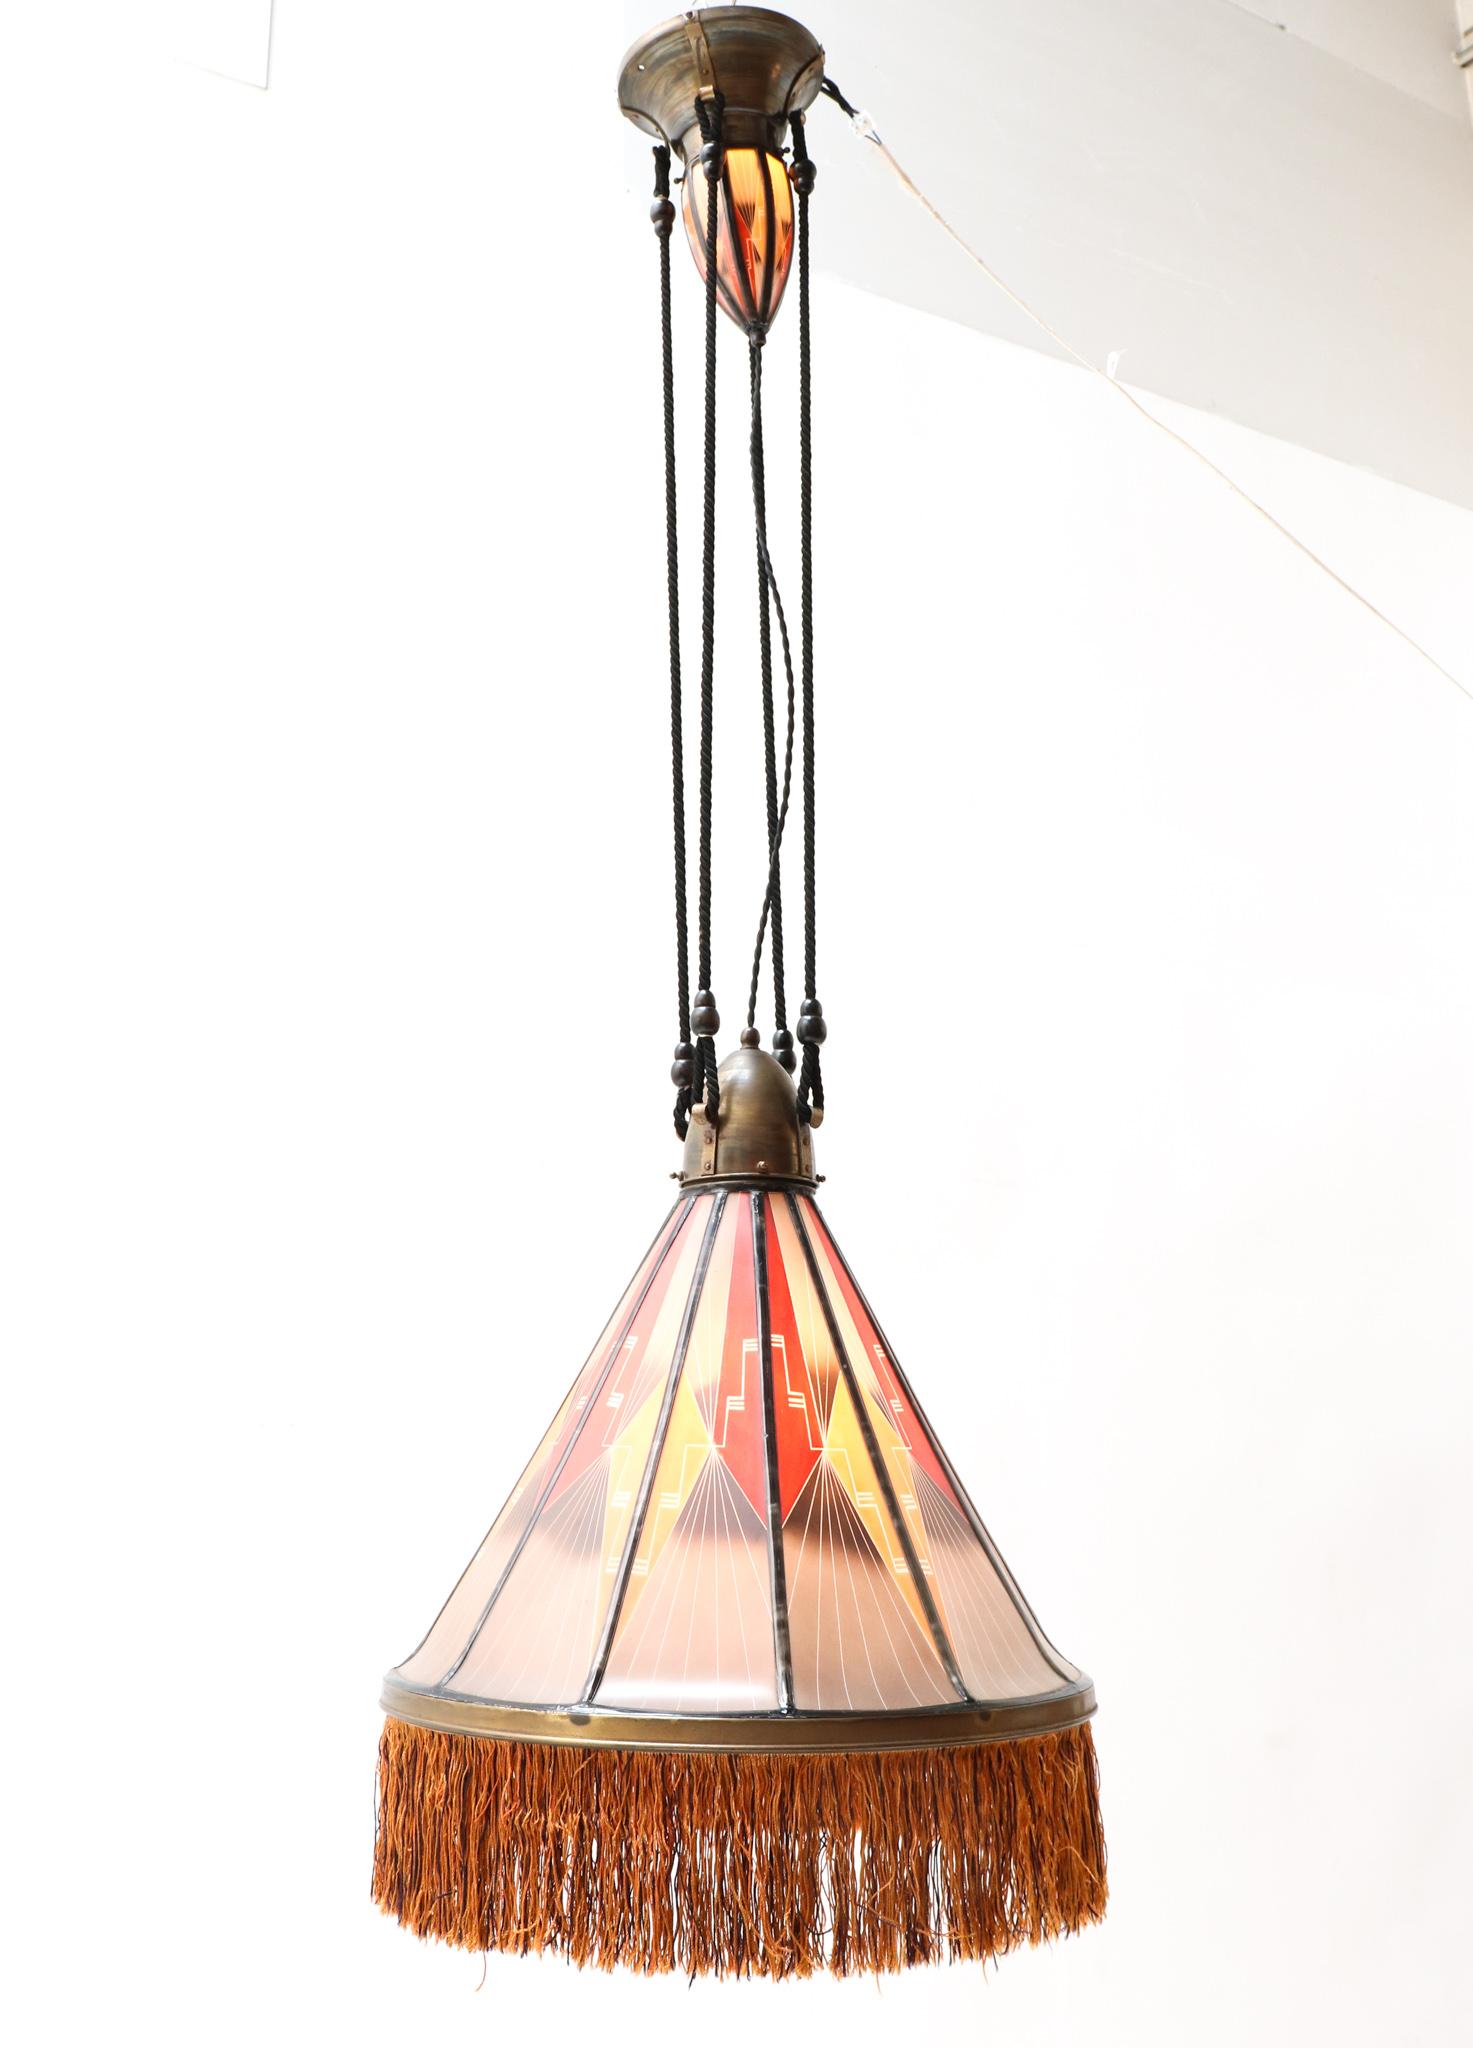 Amsterdamse School Stained Glass Chandelier by H.C. Herens for De Nieuwe Honsel 4